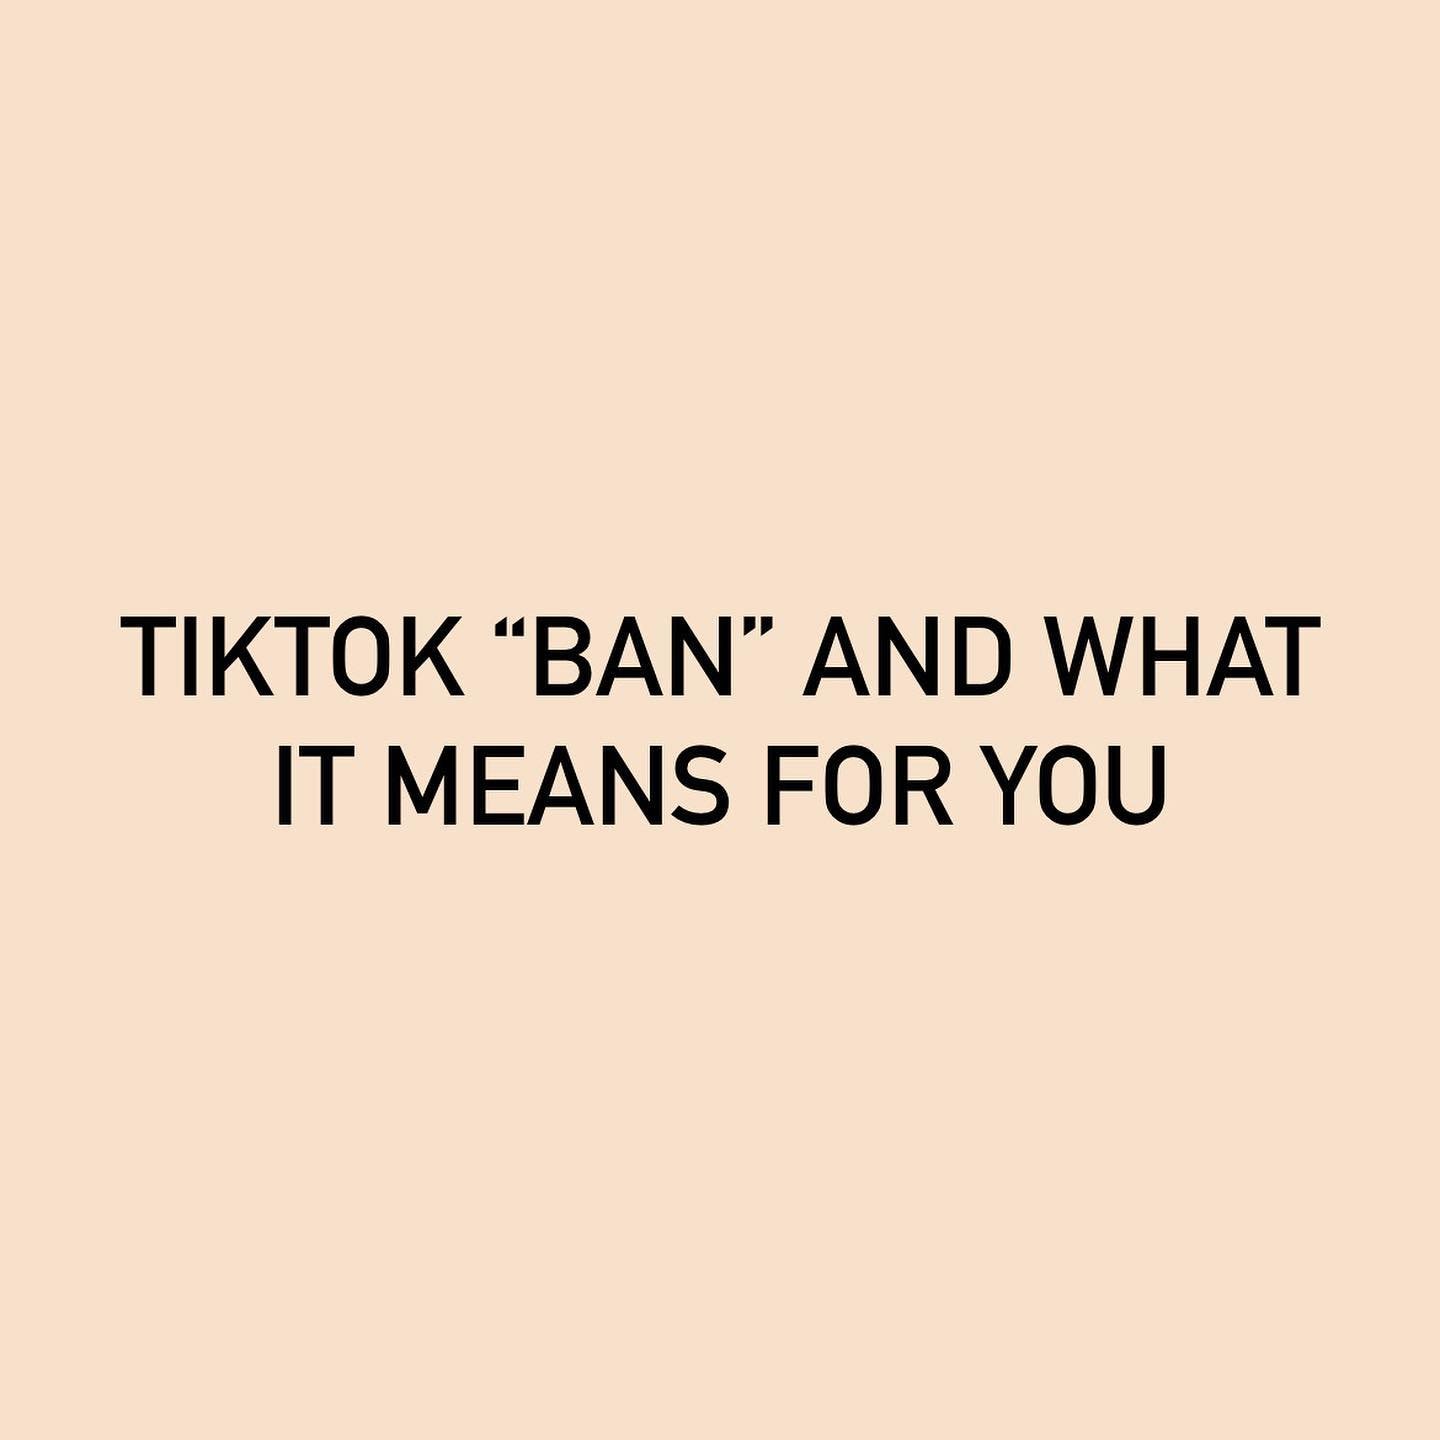 American President sign TikTok &ldquo;Ban&rdquo; bill into new law. Content &amp; video credit @sainthoax . 

What&rsquo;s your thoughts? And how could this affect you?

#tiktokban #tiktok #america